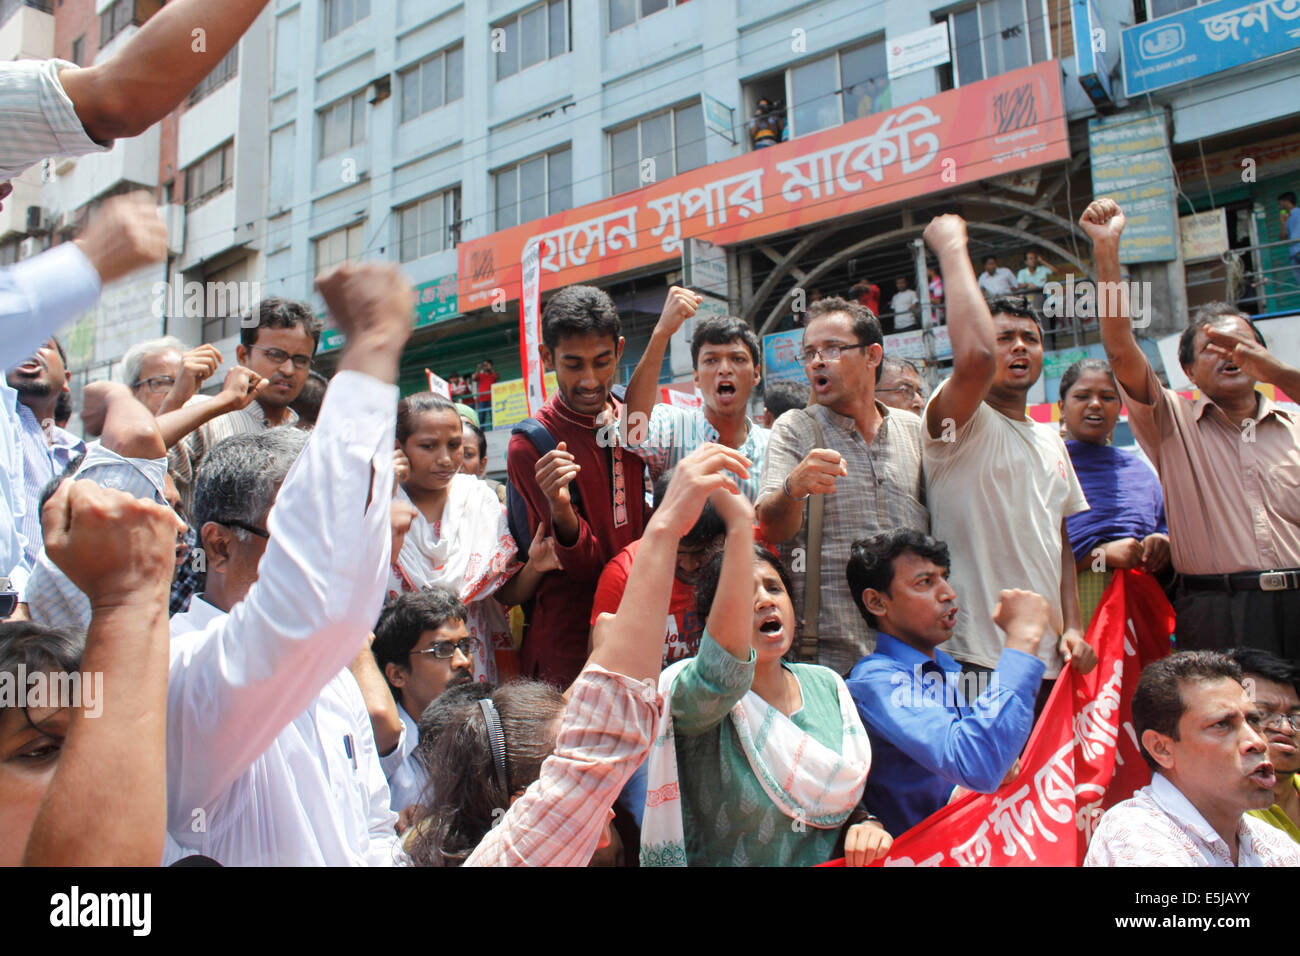 Dhaka, Bangladesh. 2nd Aug, 2014. Several hundreds of workers of Tuba Group continuing their hunger strike for the sixth consecutive day in the factory demanding outstanding salaries and Eid bonus. Over 1, 600 workers of Tuba Group, which also owns Tazreen Fashions Limited that was burnt down in November 2012 killing 112 workers, protested for their salaries and and Eid bonuses during the months of May, June and July. Credit:  zakir hossain chowdhury zakir/Alamy Live News Stock Photo